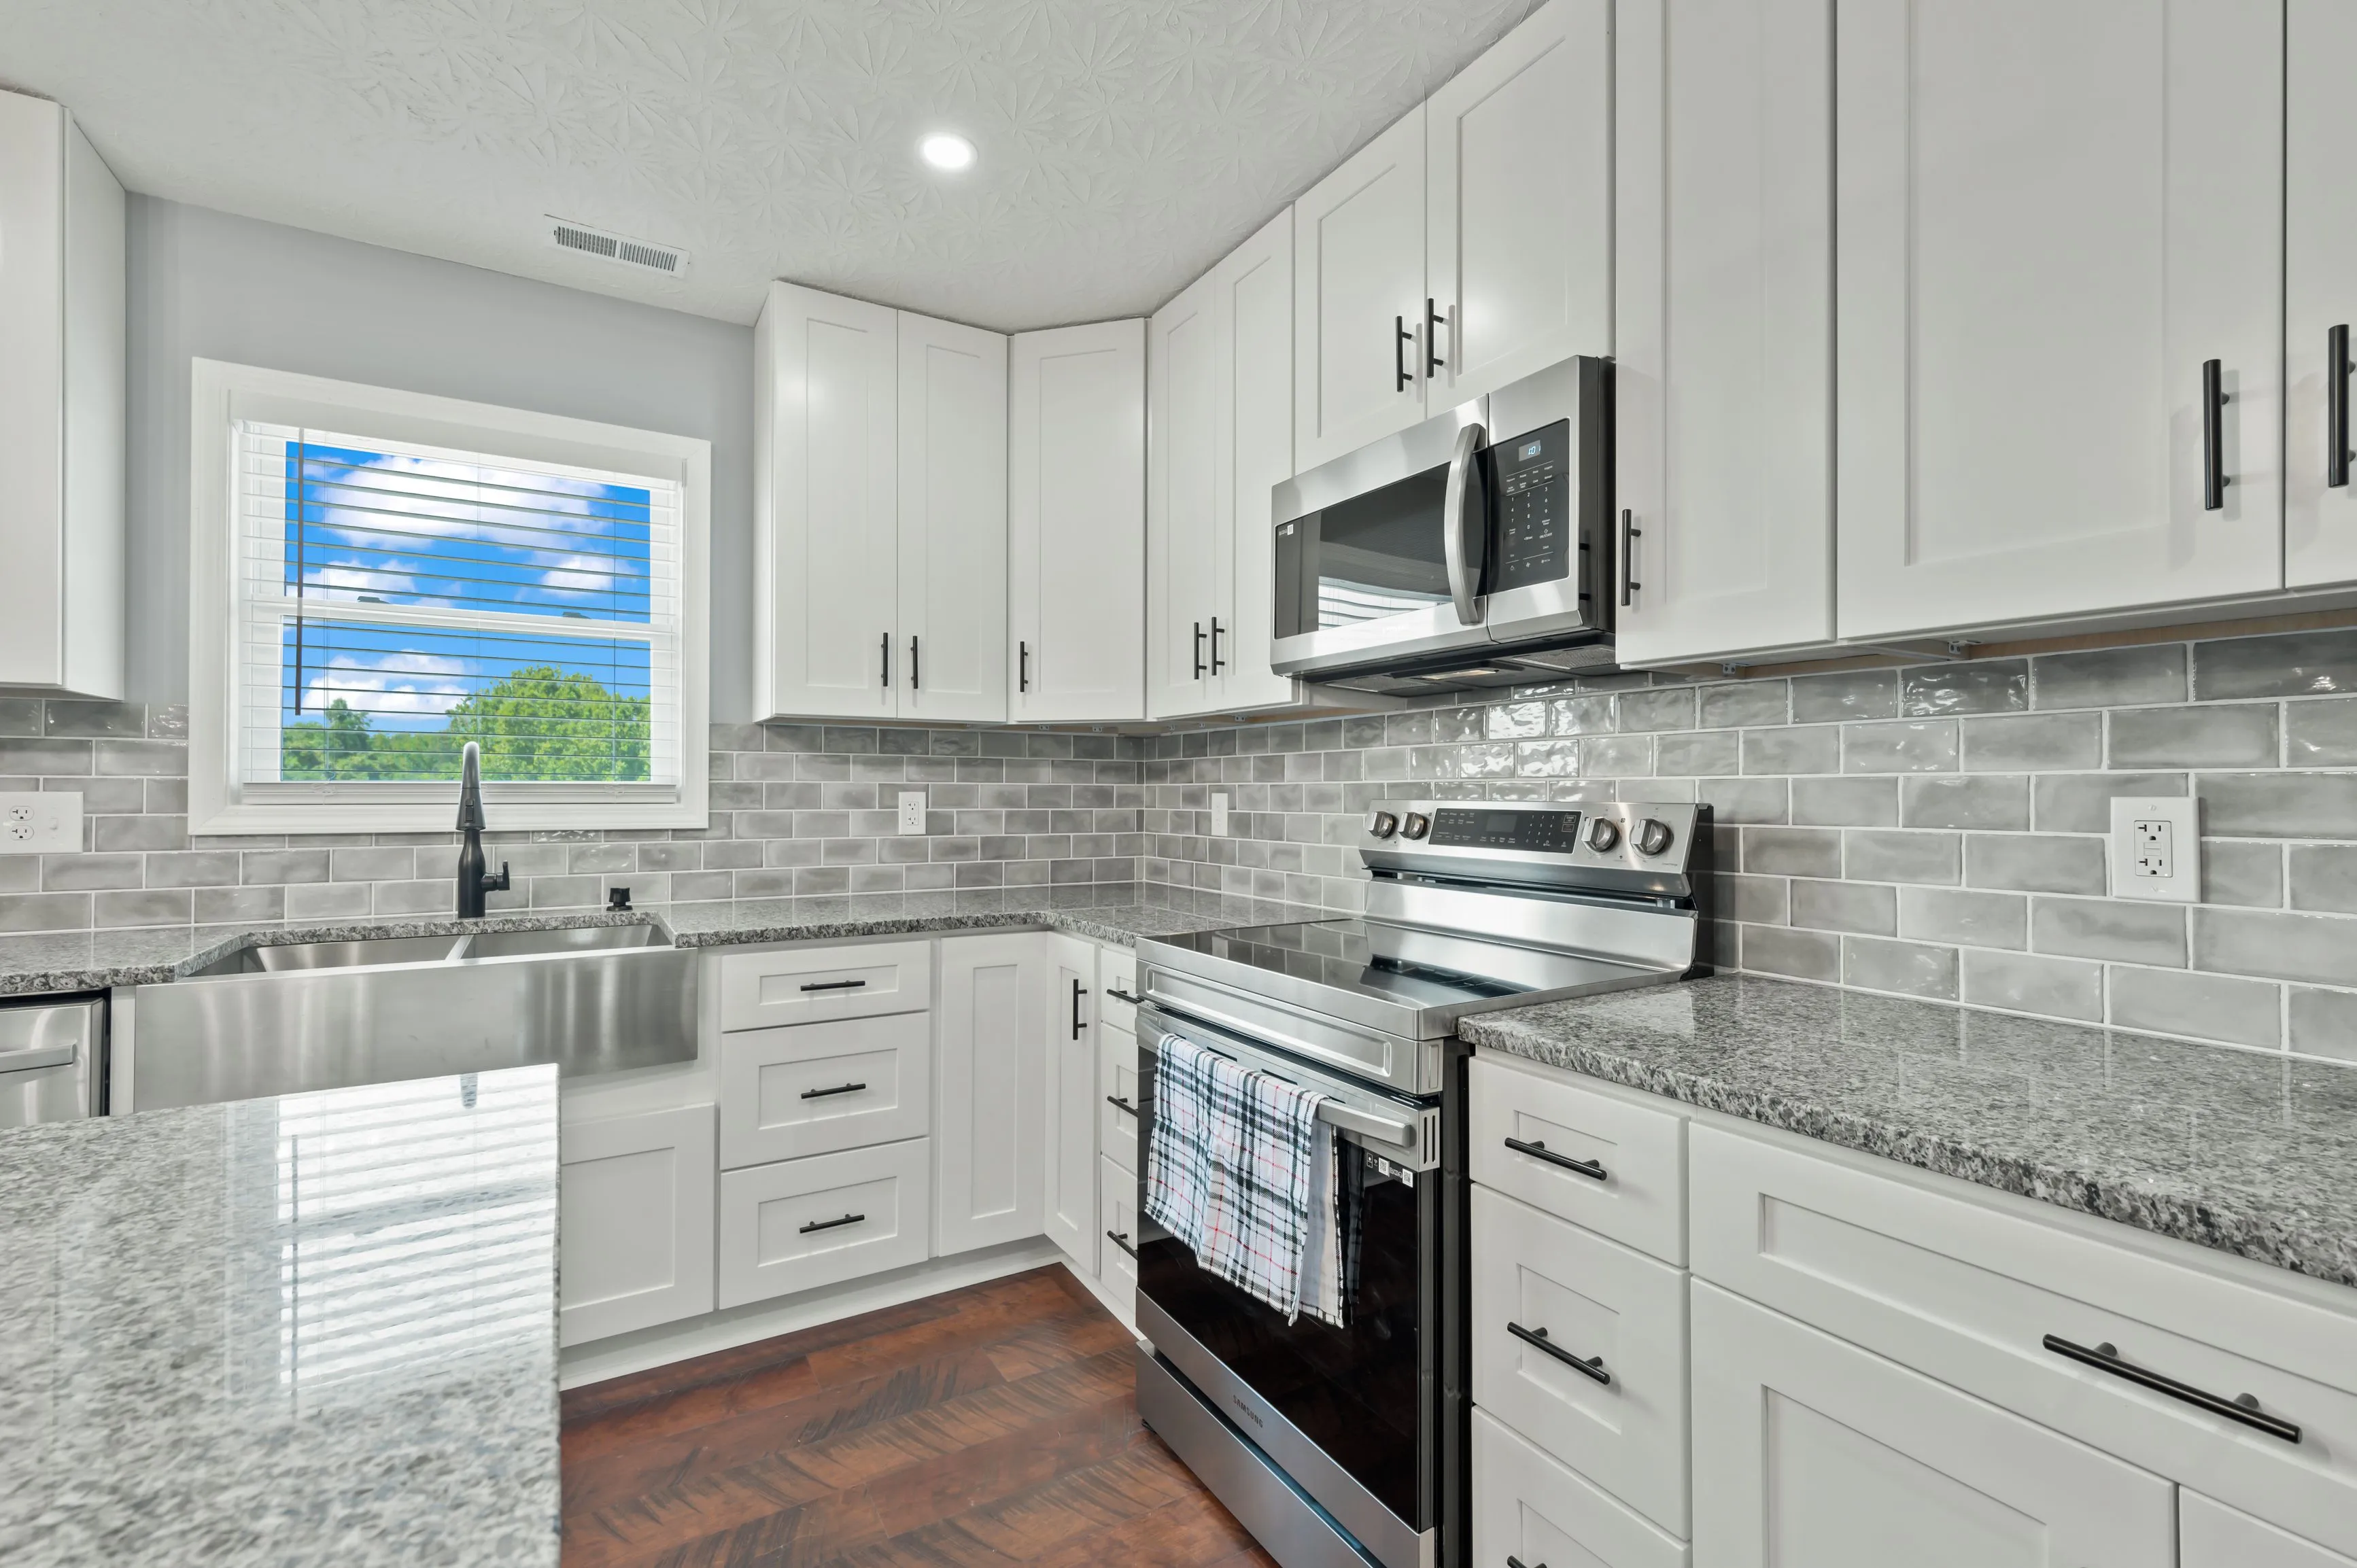 Modern kitchen interior with white cabinetry, stainless steel appliances, and grey subway tile backsplash.